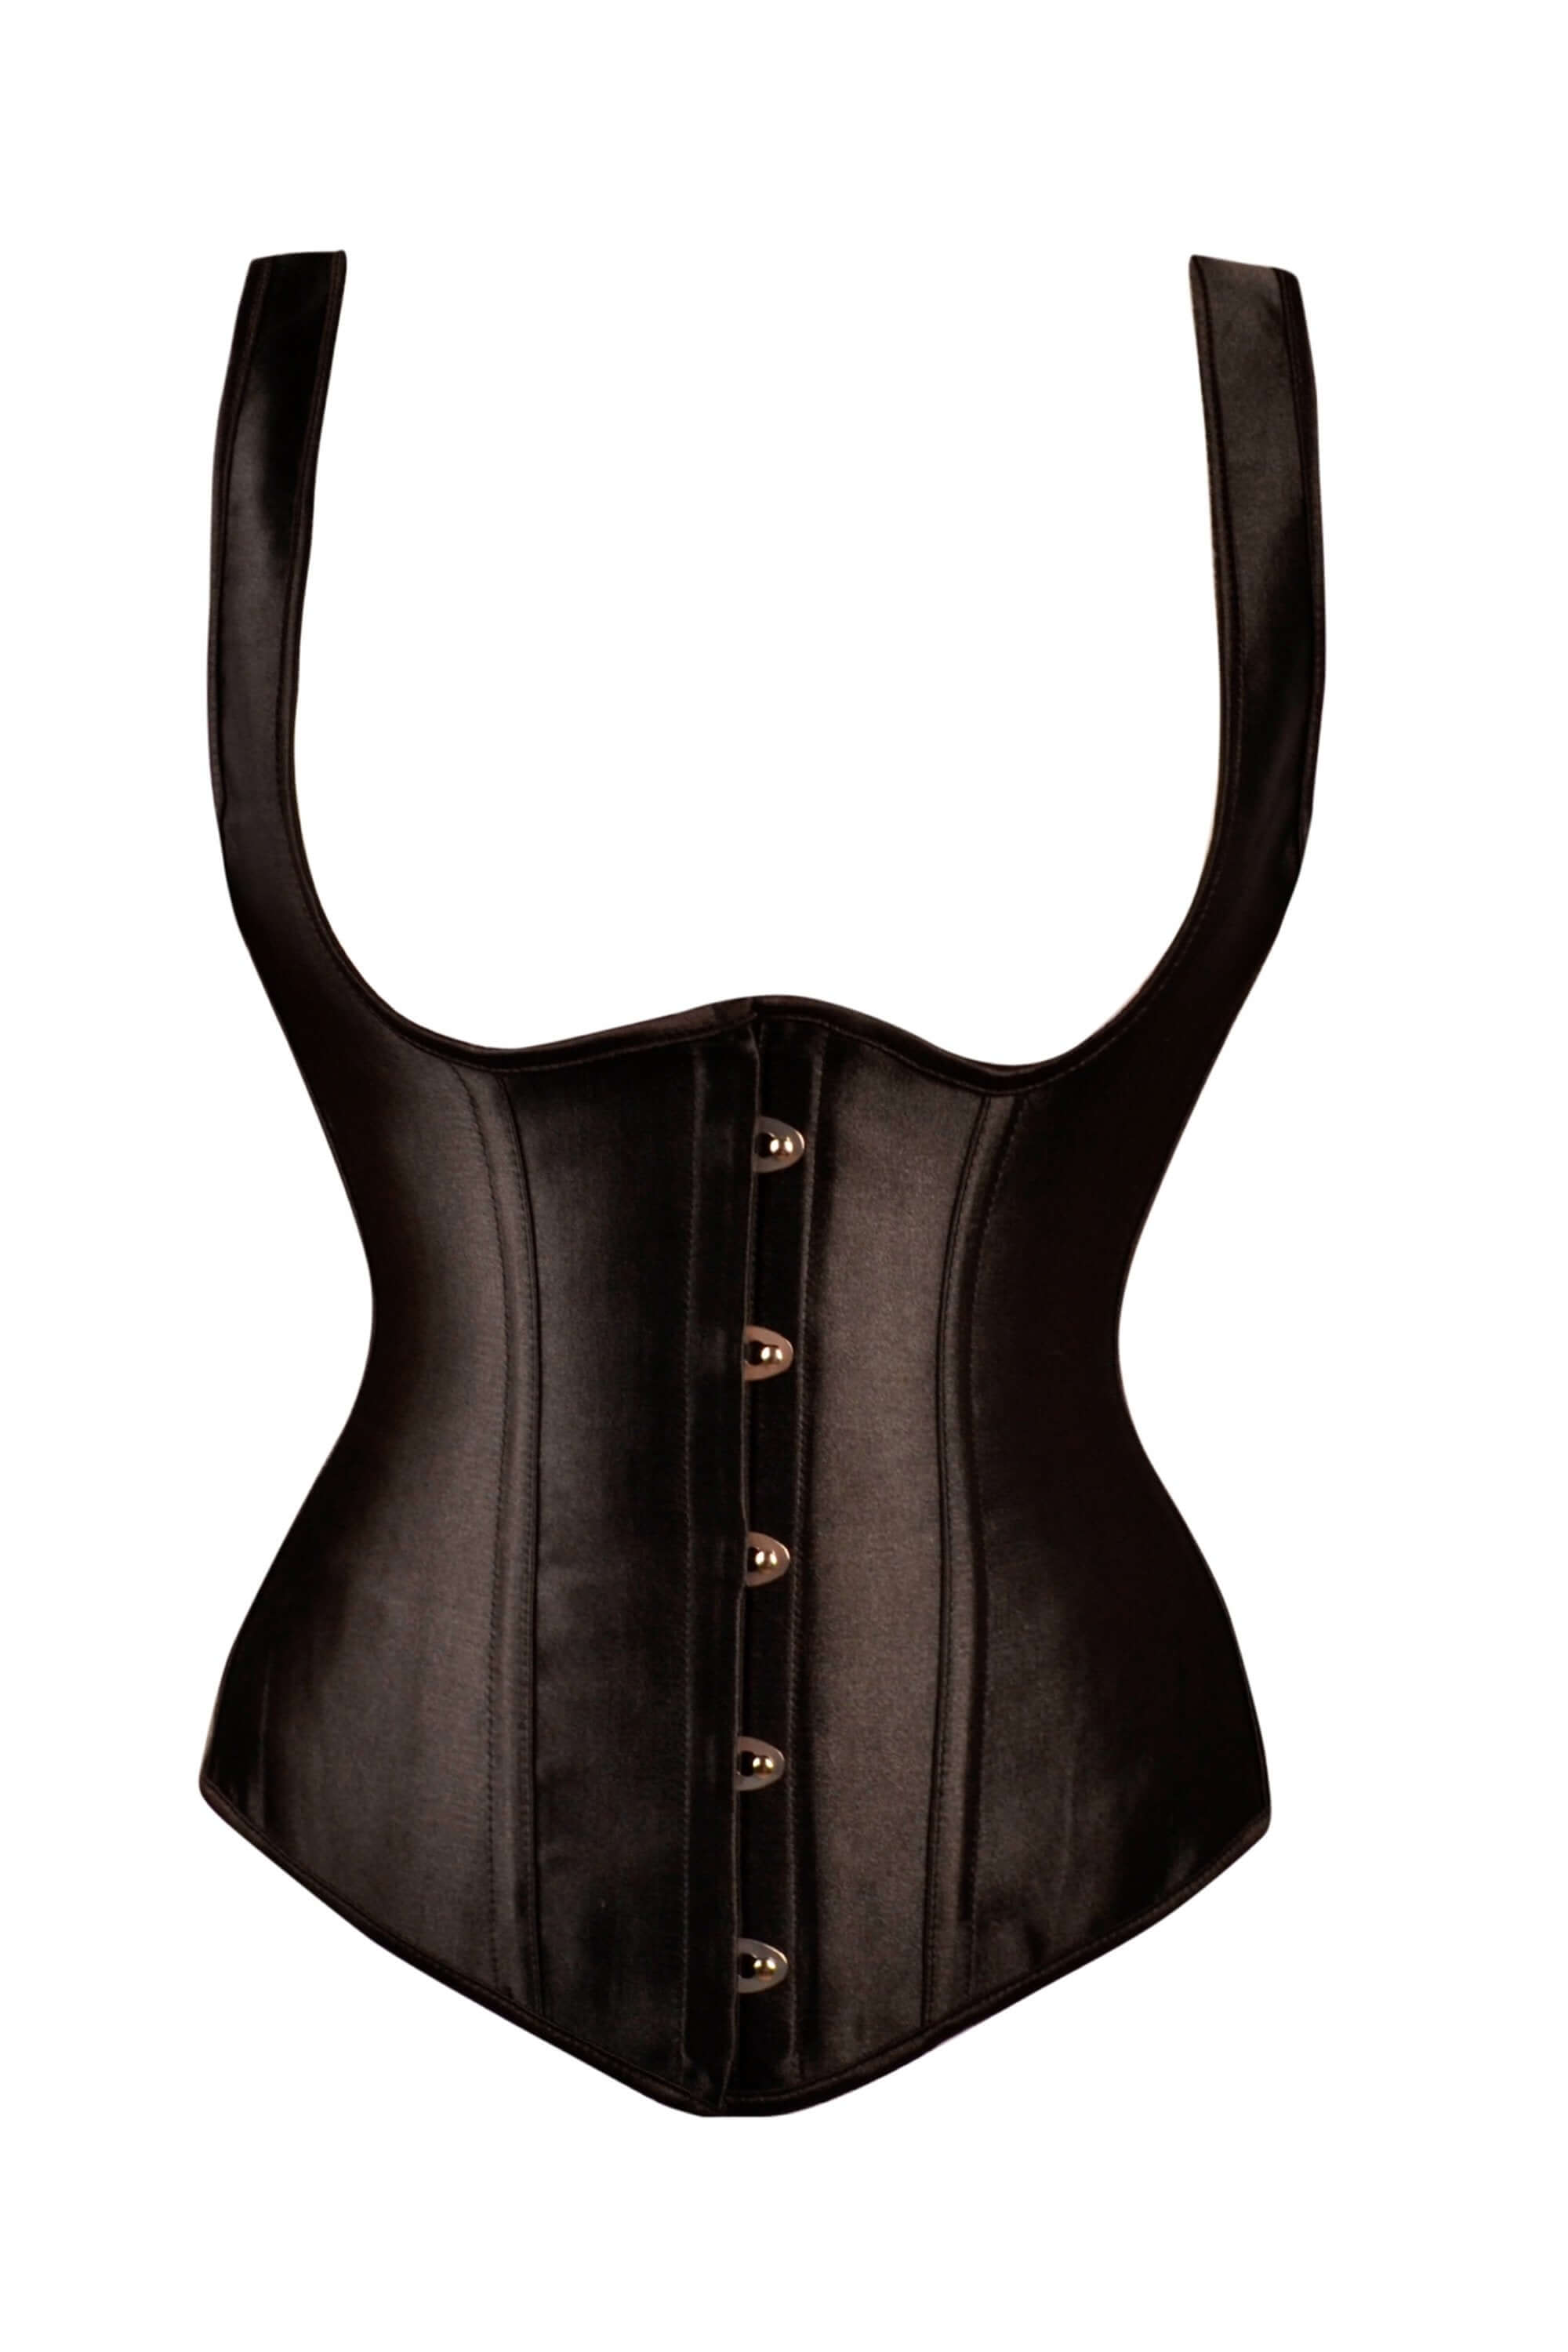 Do Corsets Help Reduce your Tummy?